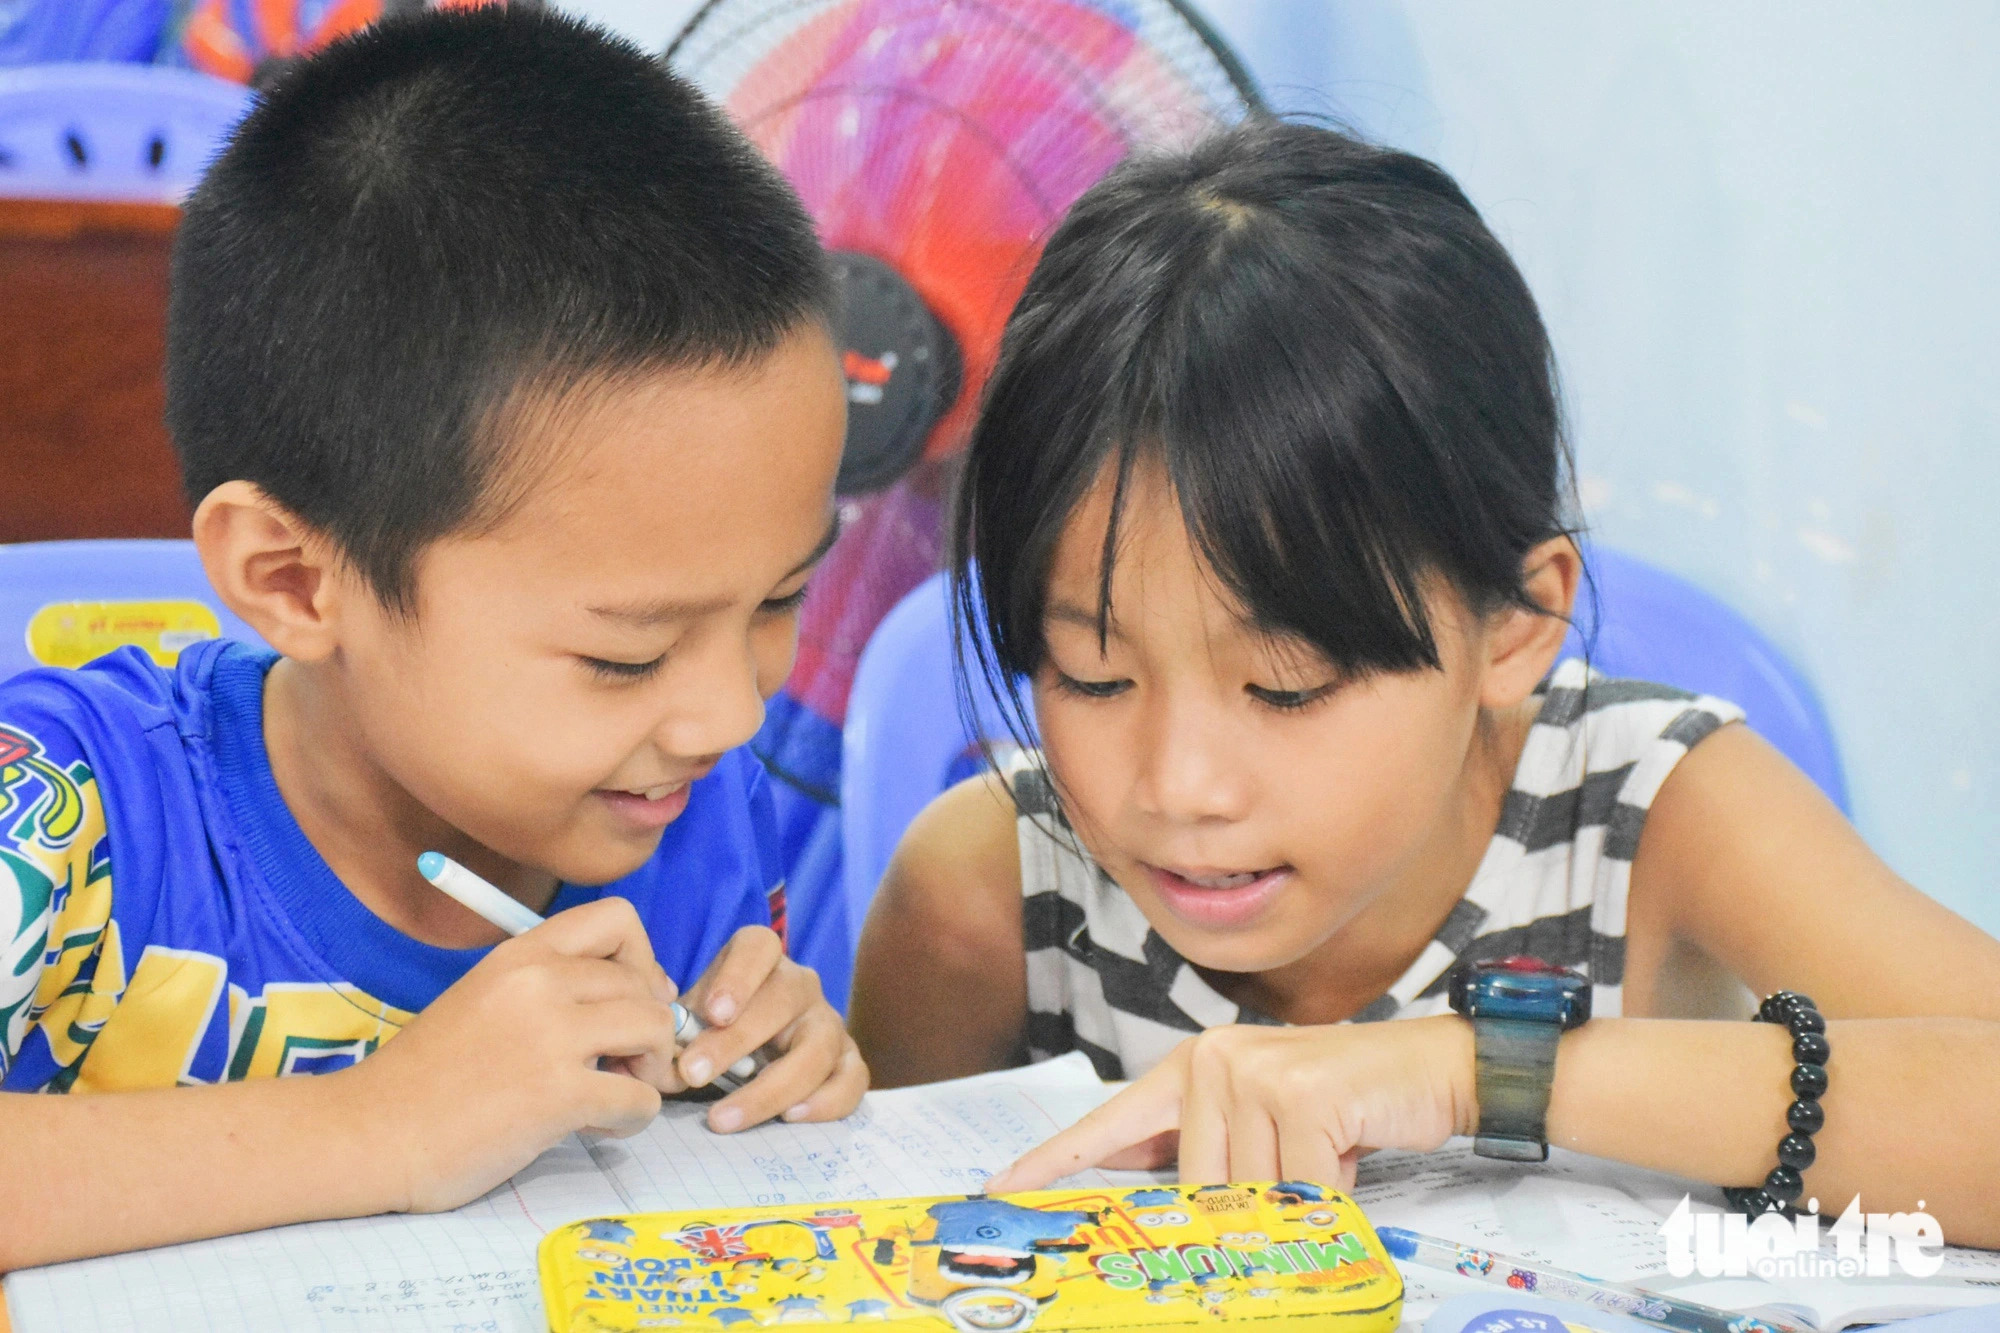 Despite being from marginalized communities, the children in Duc’s class always try their best. Photo: Tran Hoai / Tuoi Tre